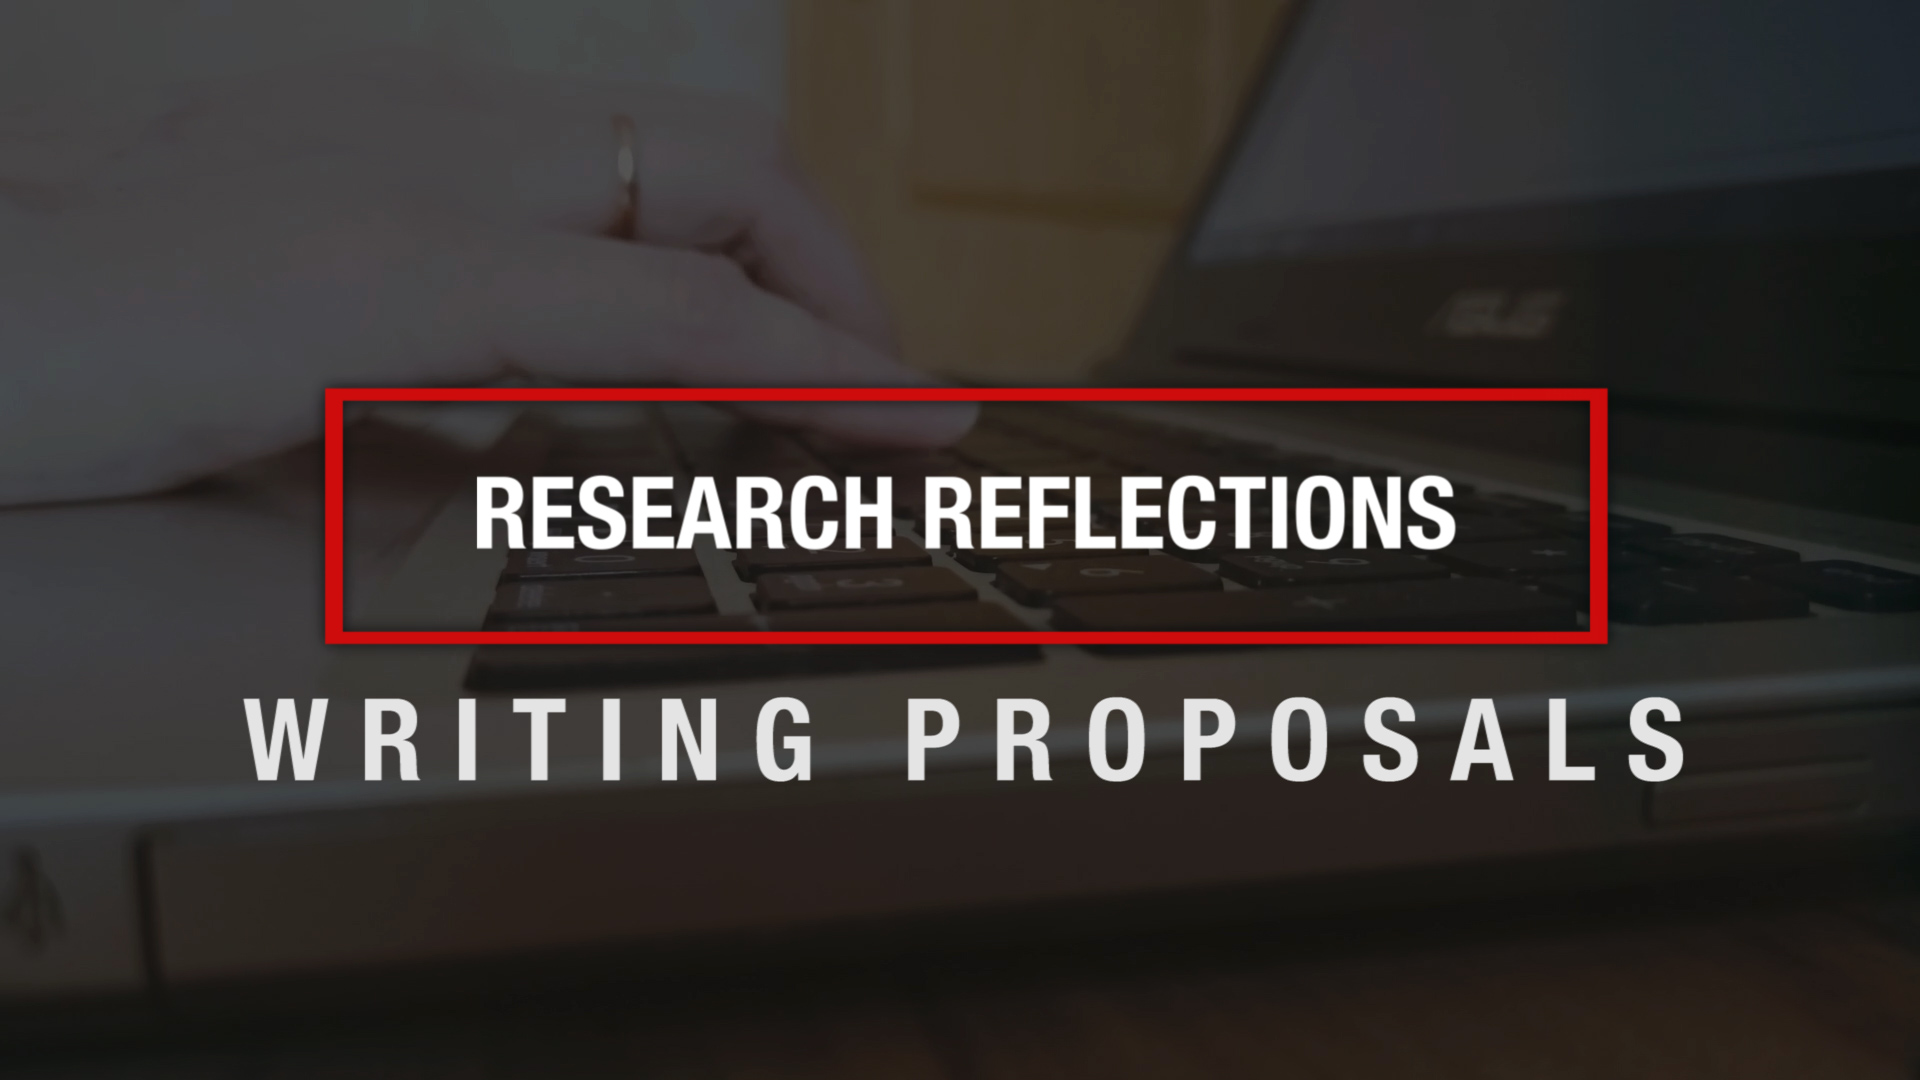 Text of "Research Reflections: Writing Proposals" superimposed over an image of somebody typing on a laptop.